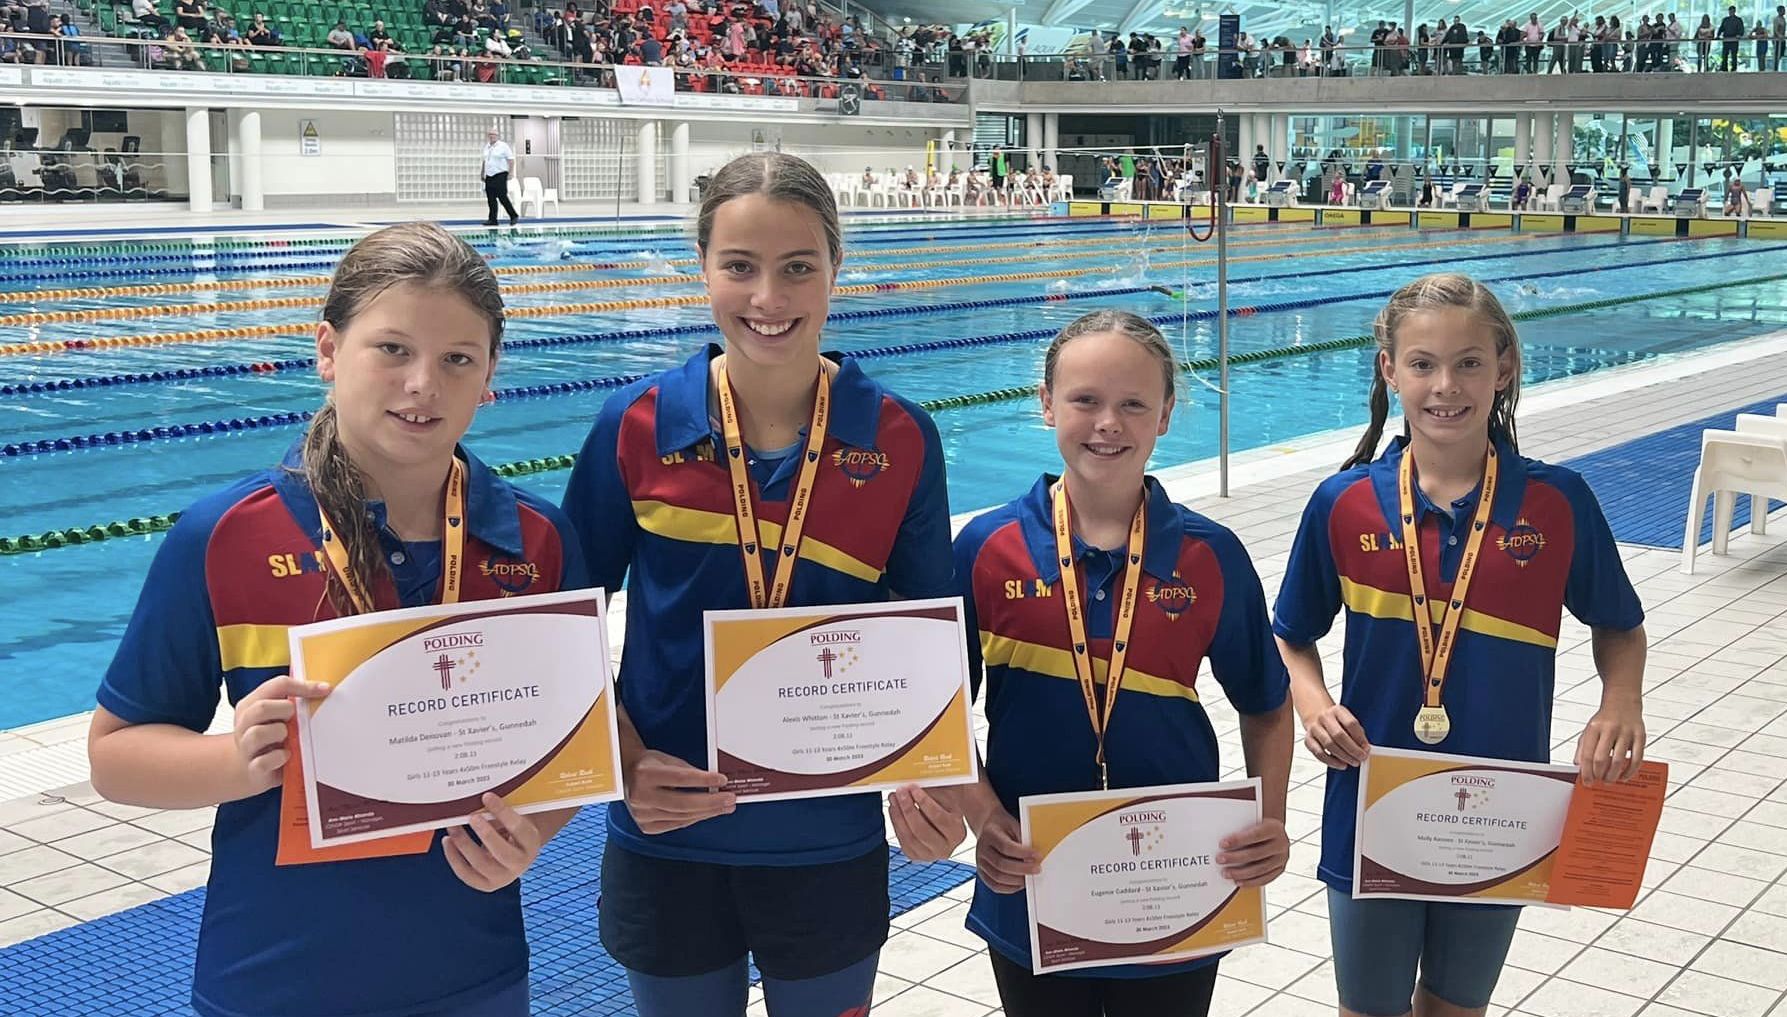 St Xavier’s swimmers’ championships success